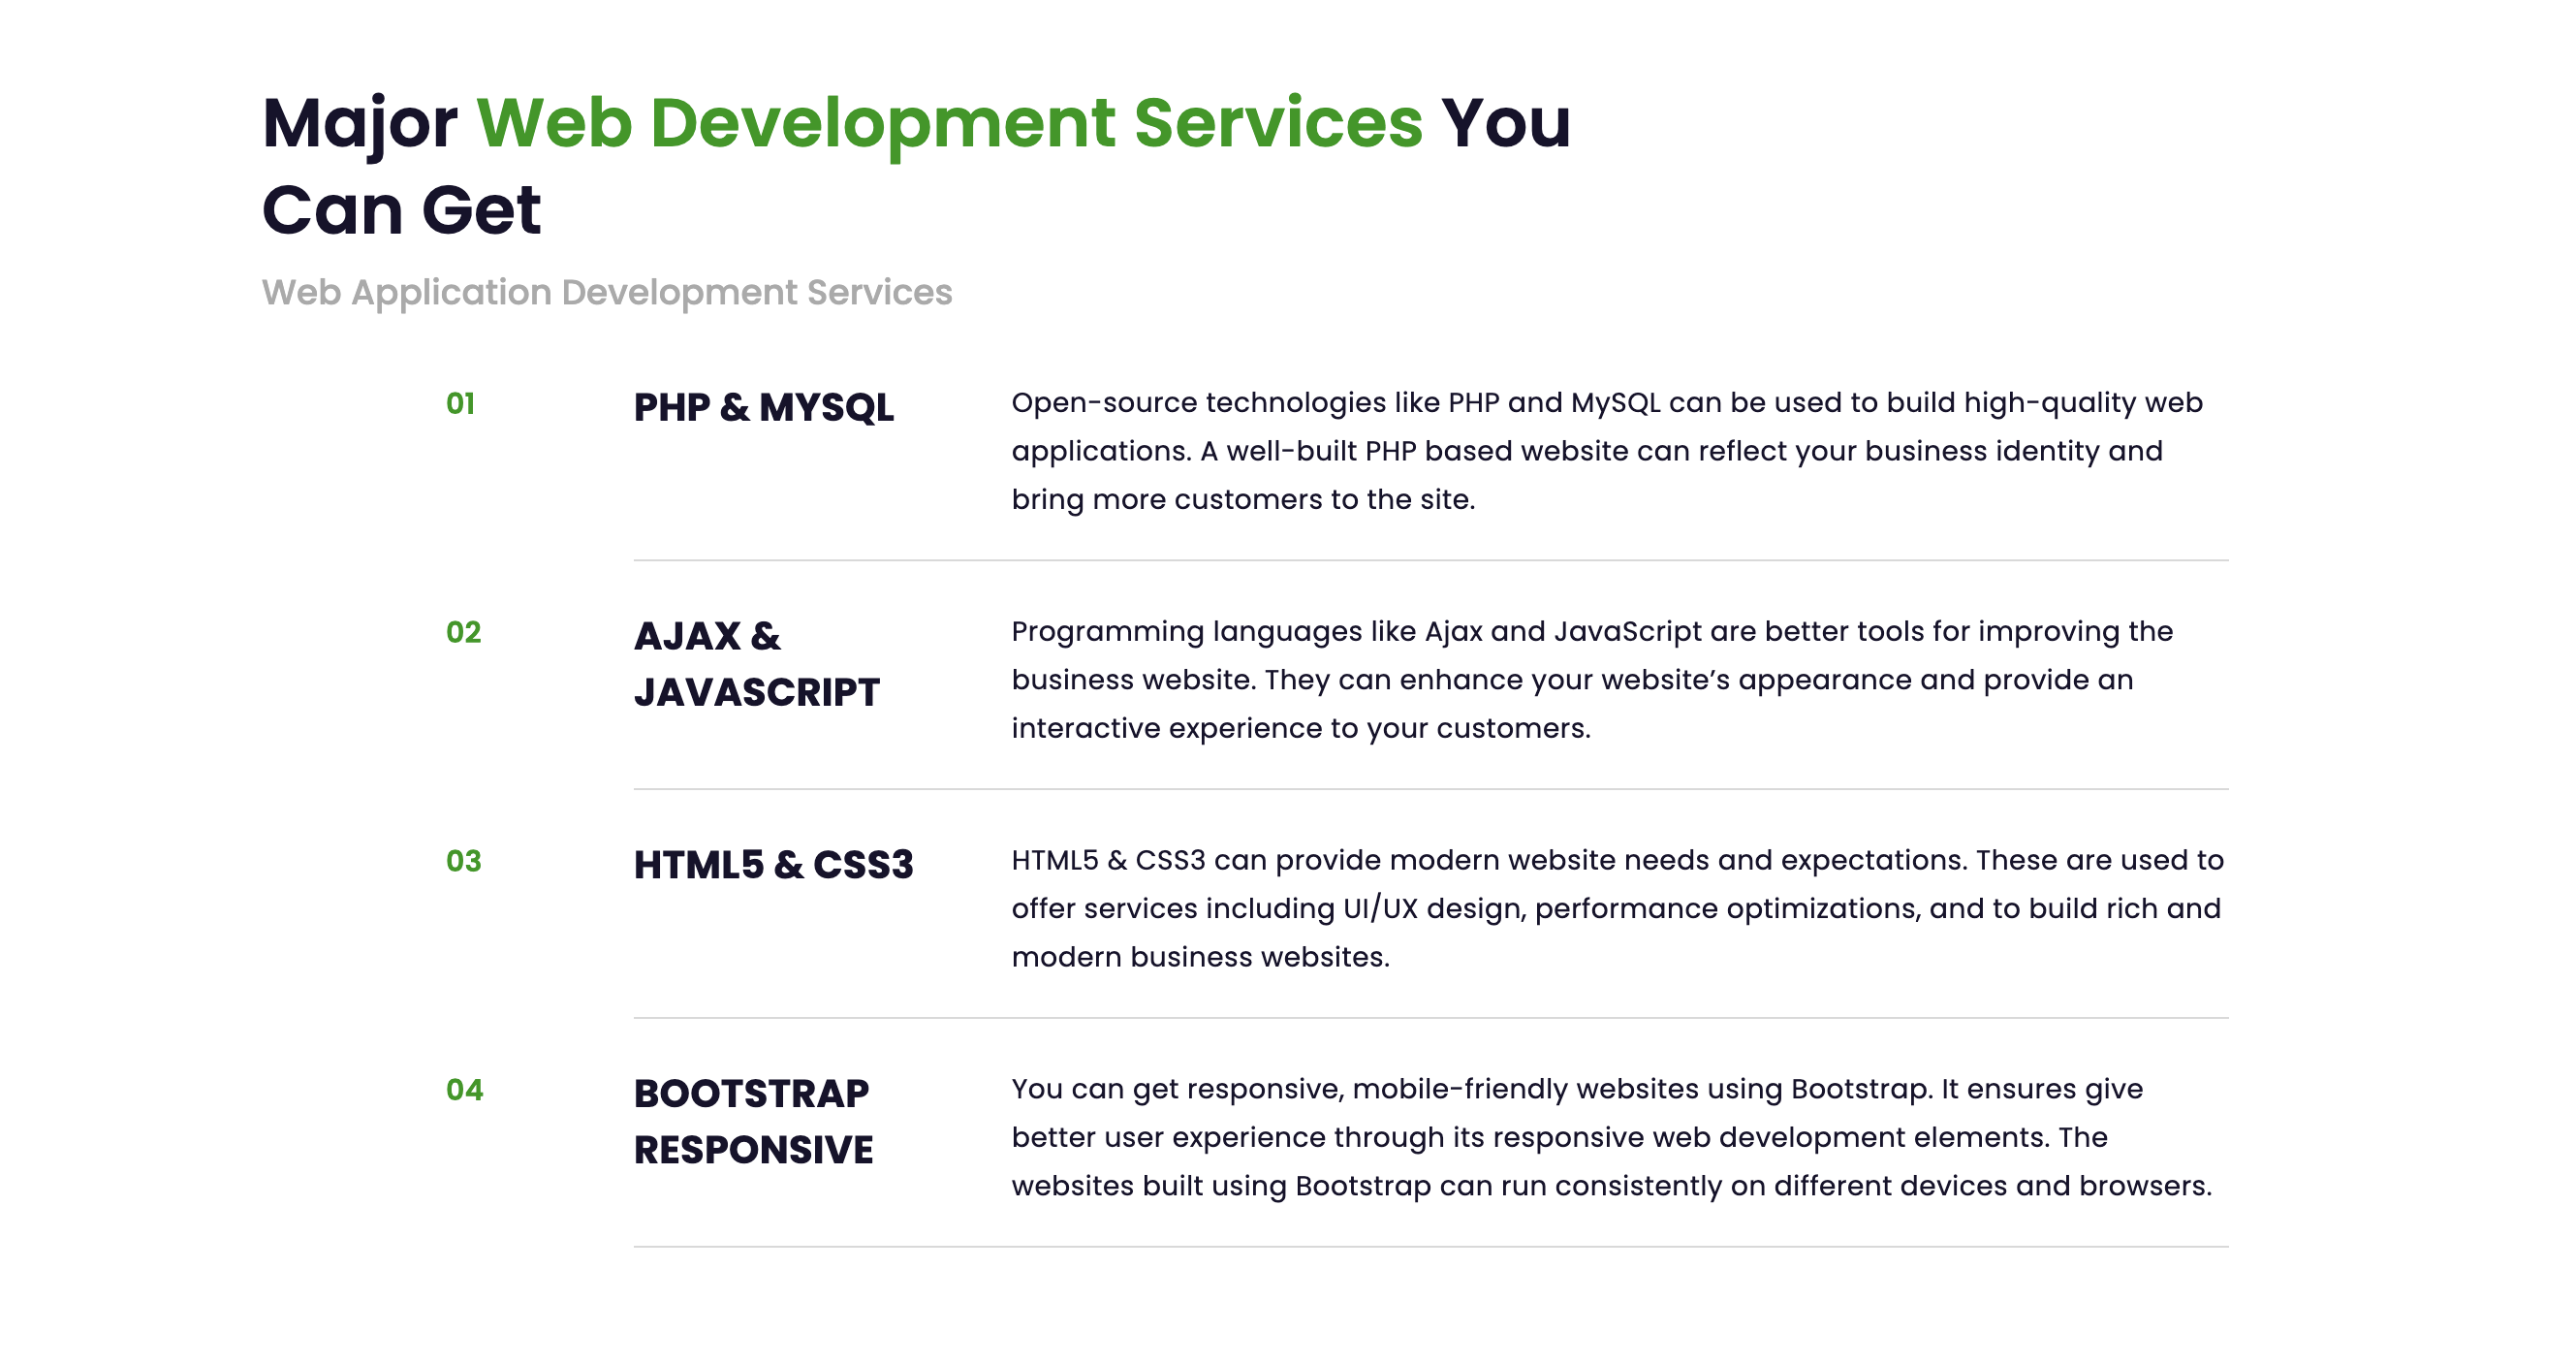 Major Web Development Services You Can Get